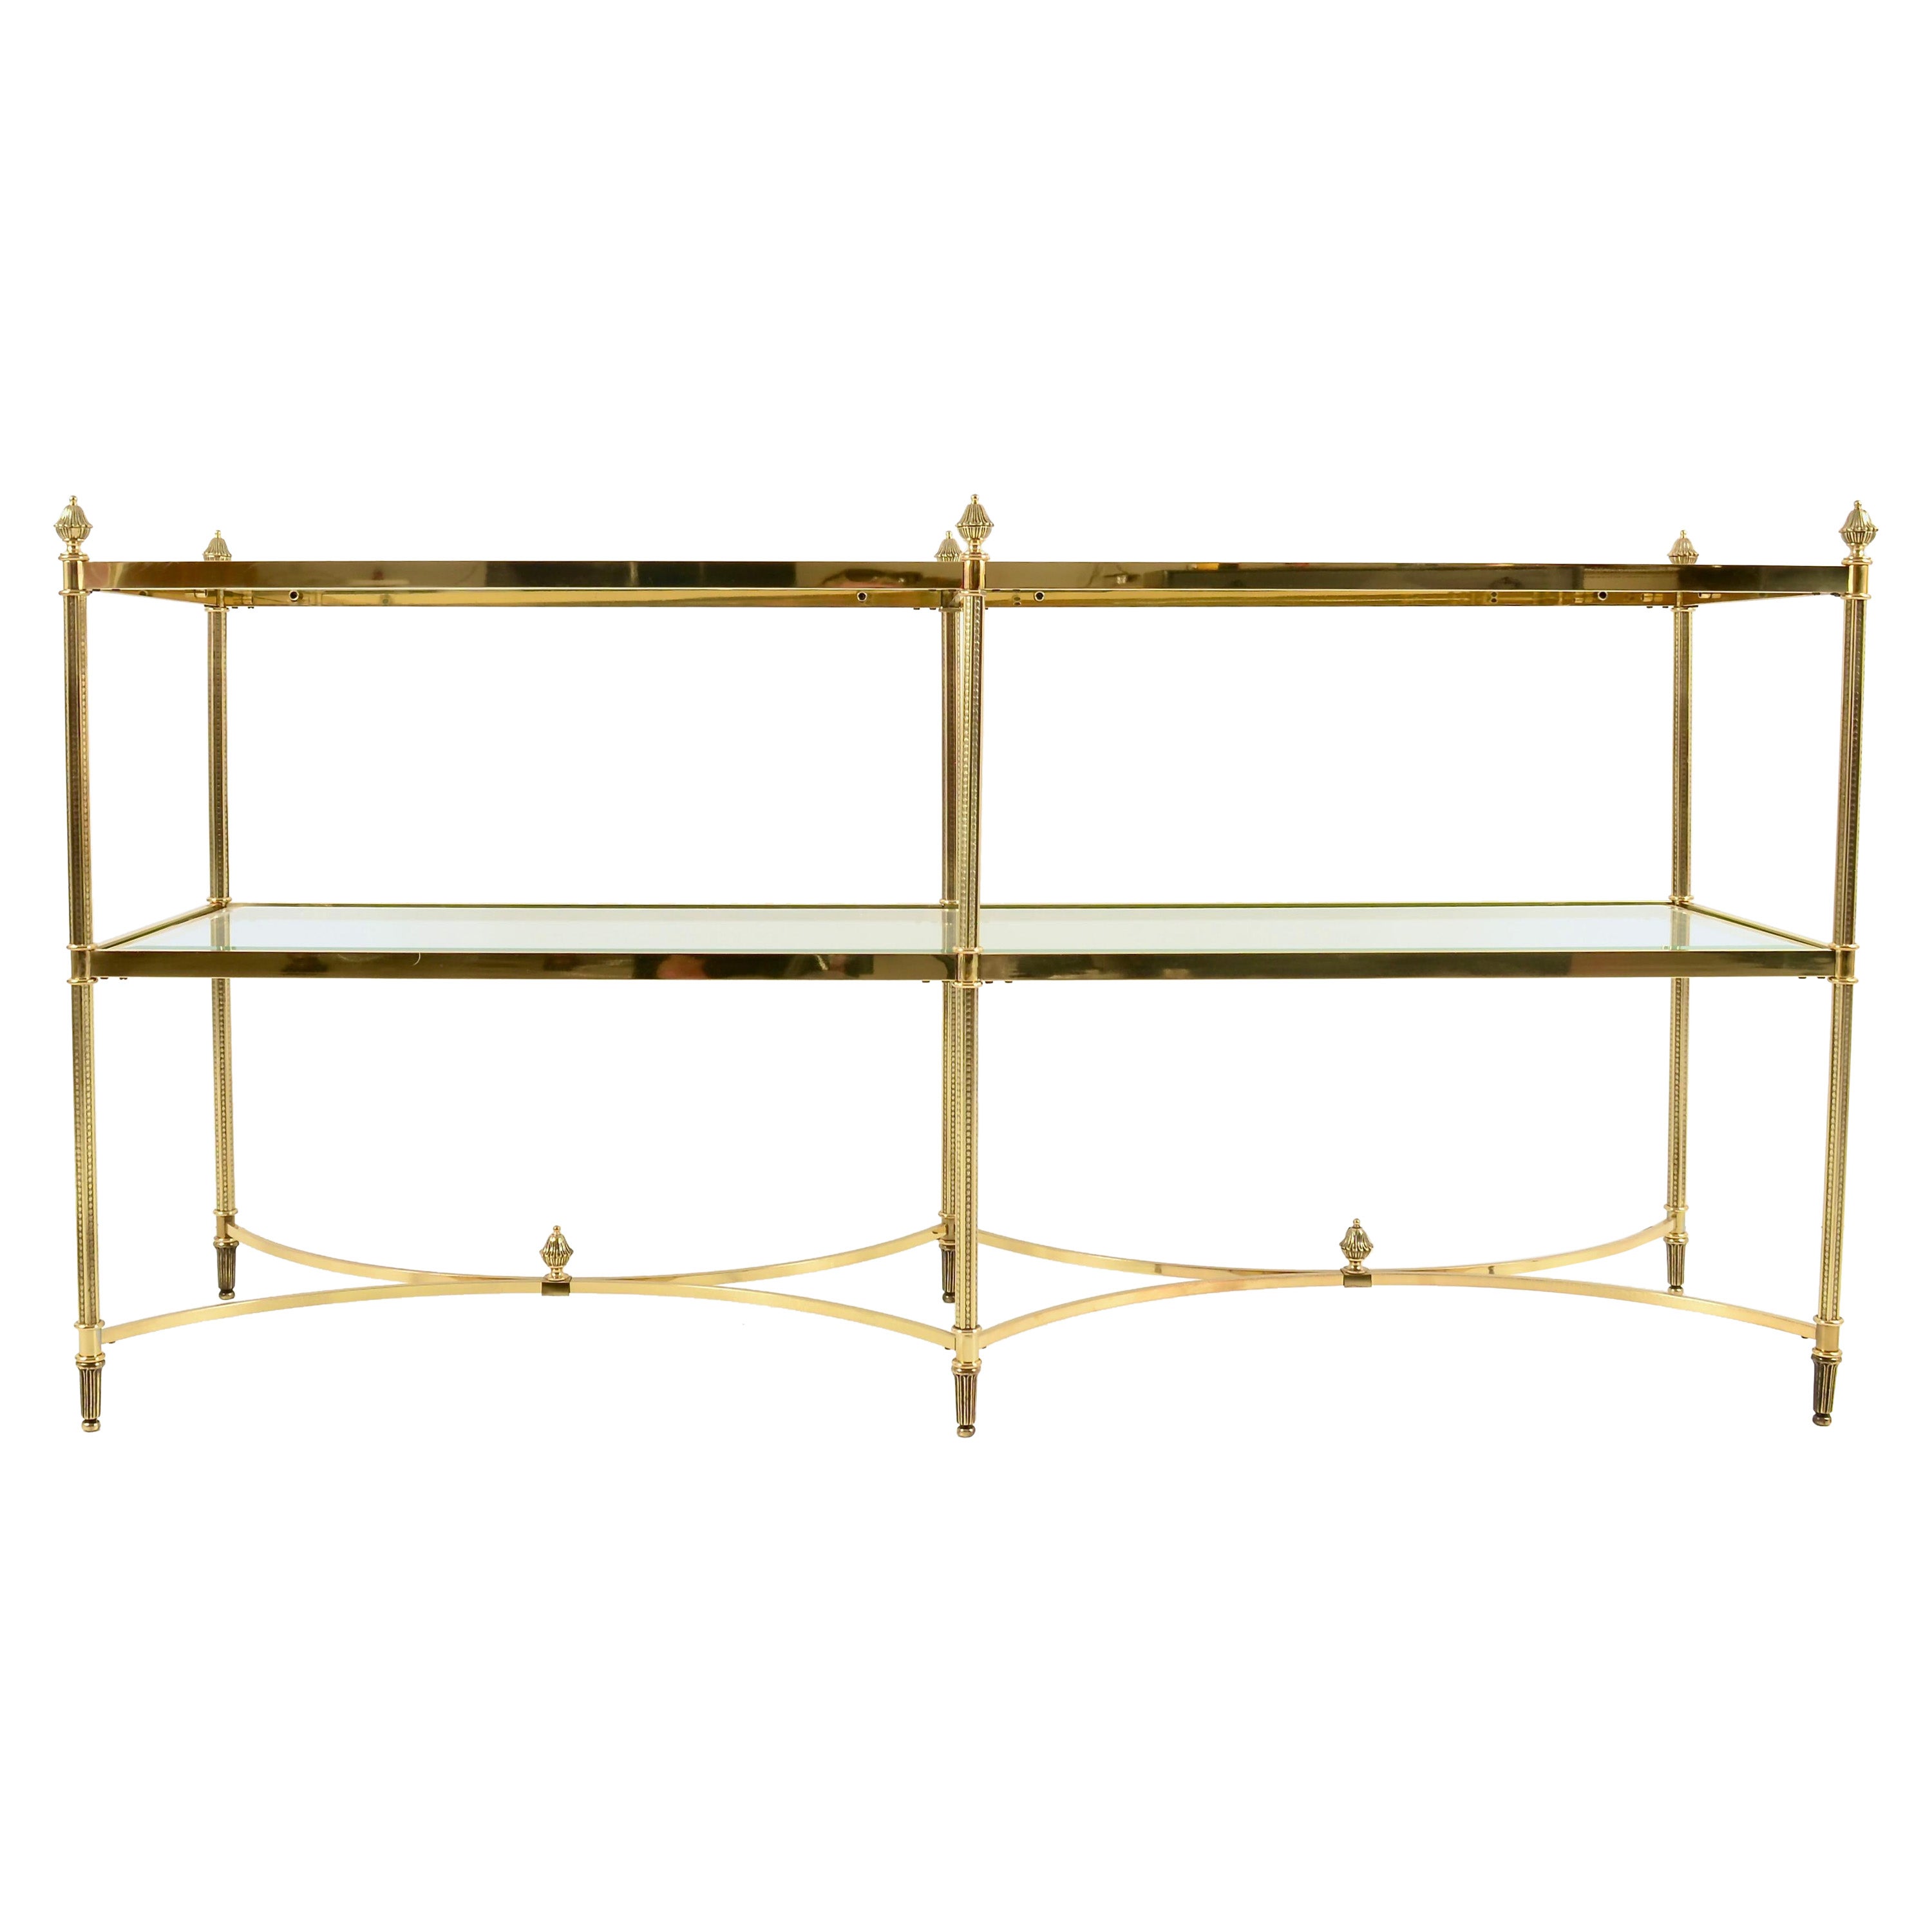 Neo-classical Form Sofa Table in Polished Brass w/ Beveled Glass Shelves For Sale